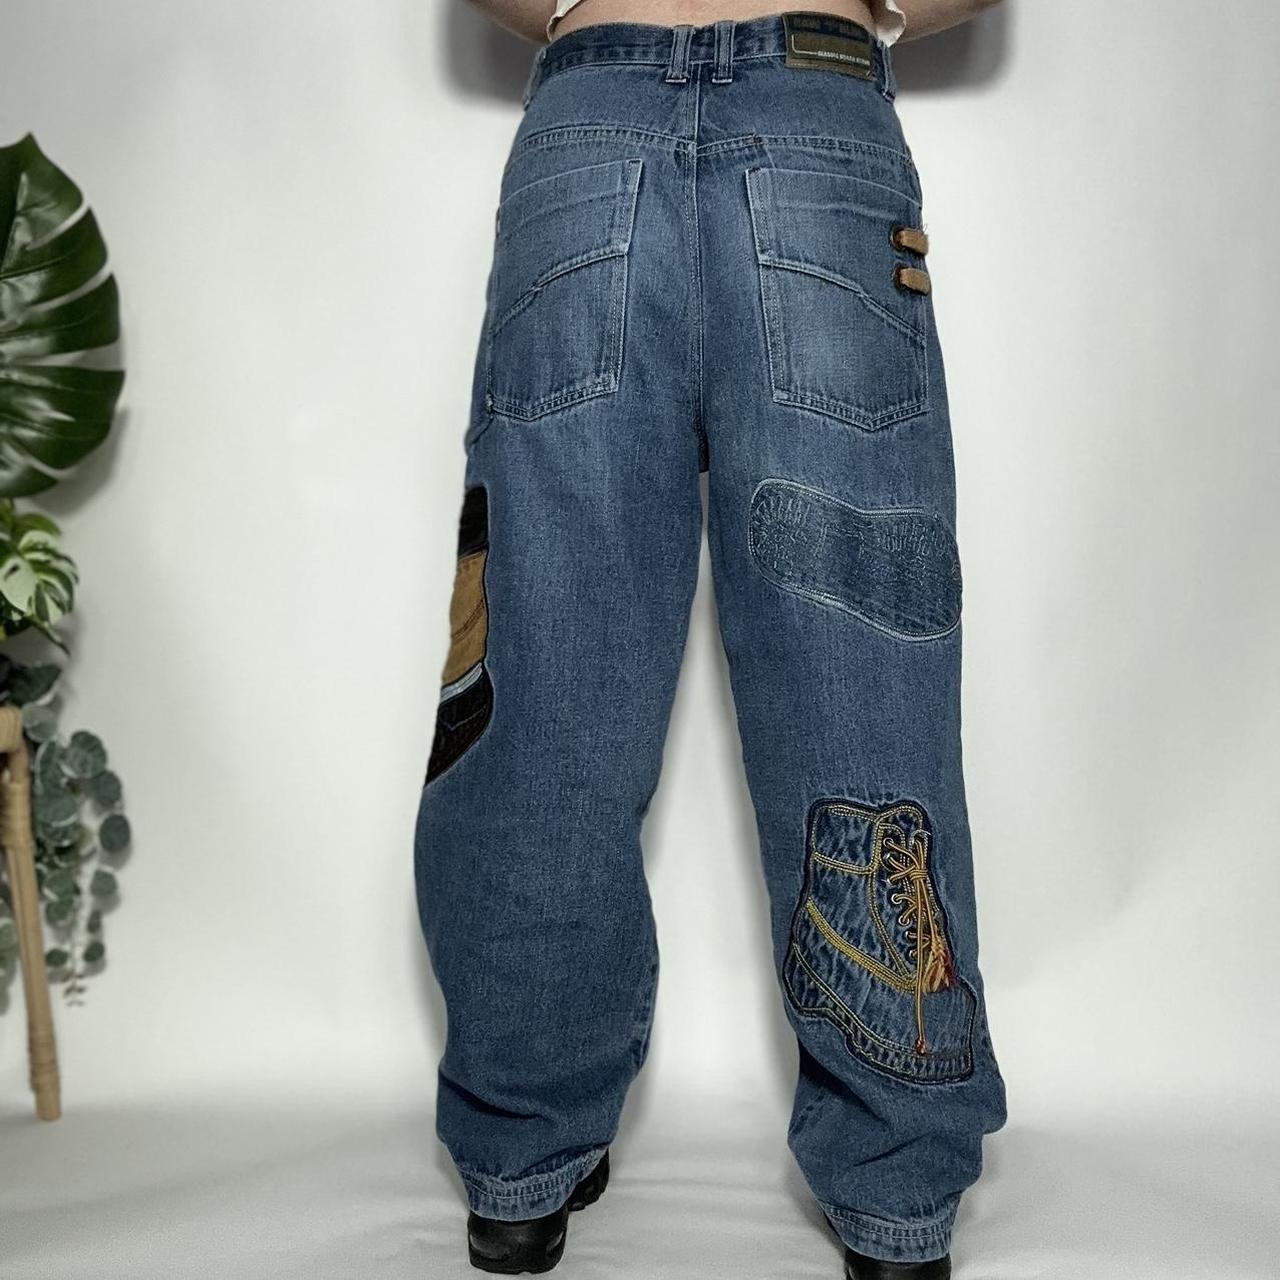 Vintage 90s Raw Blue baggy jeans with Timberland boot graphic